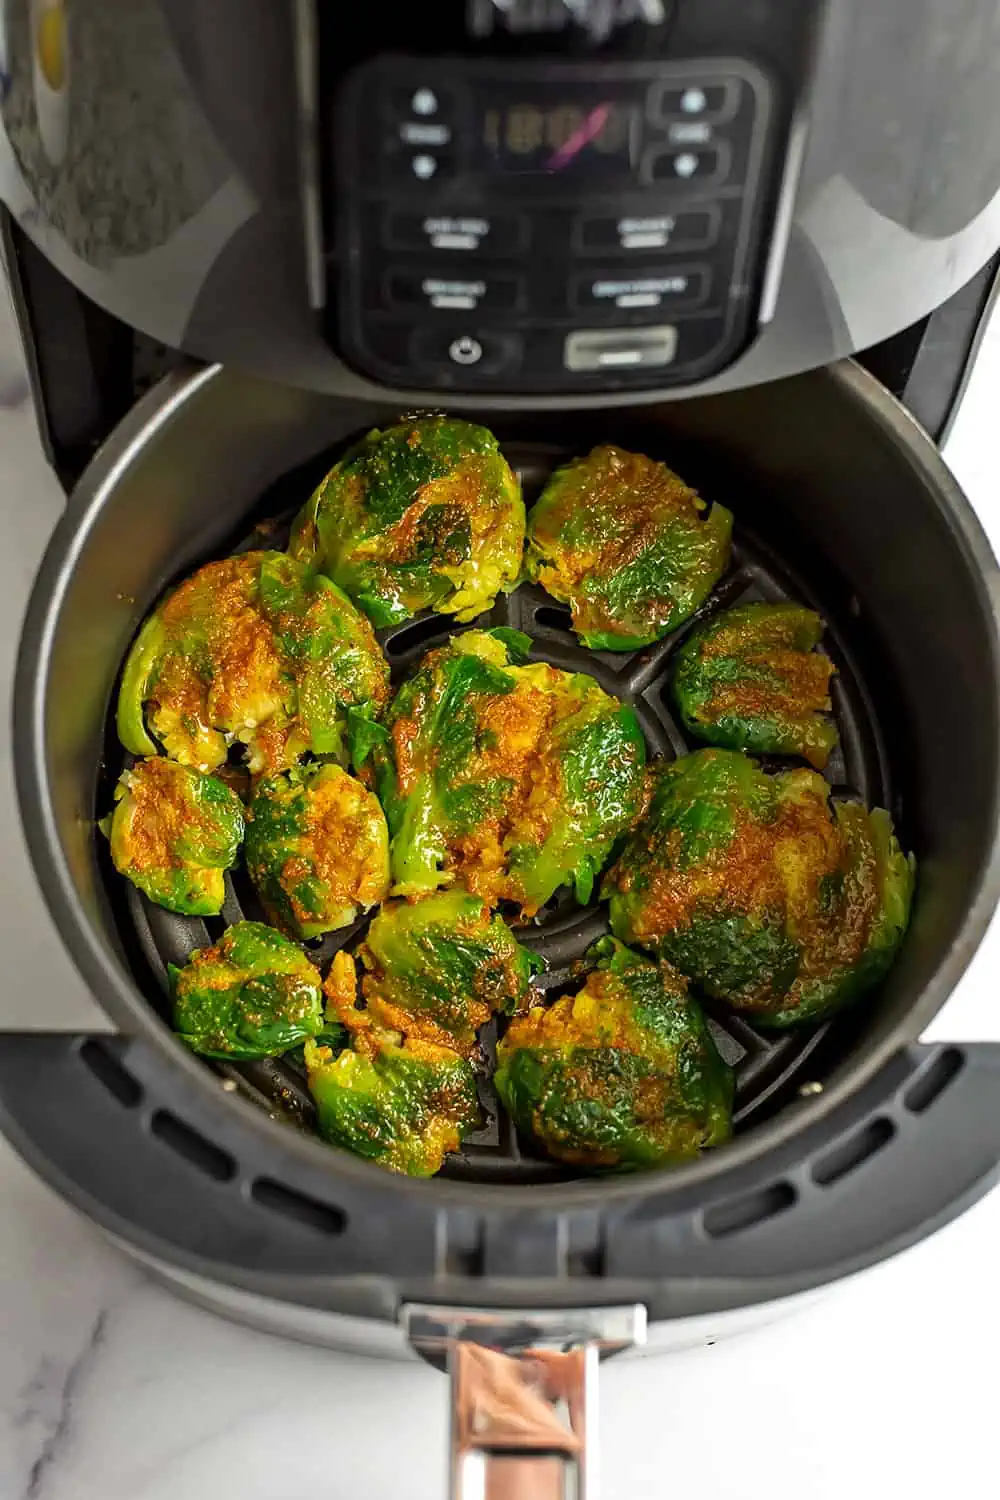 Smashed brussel sprouts coated in turmeric spice blend.